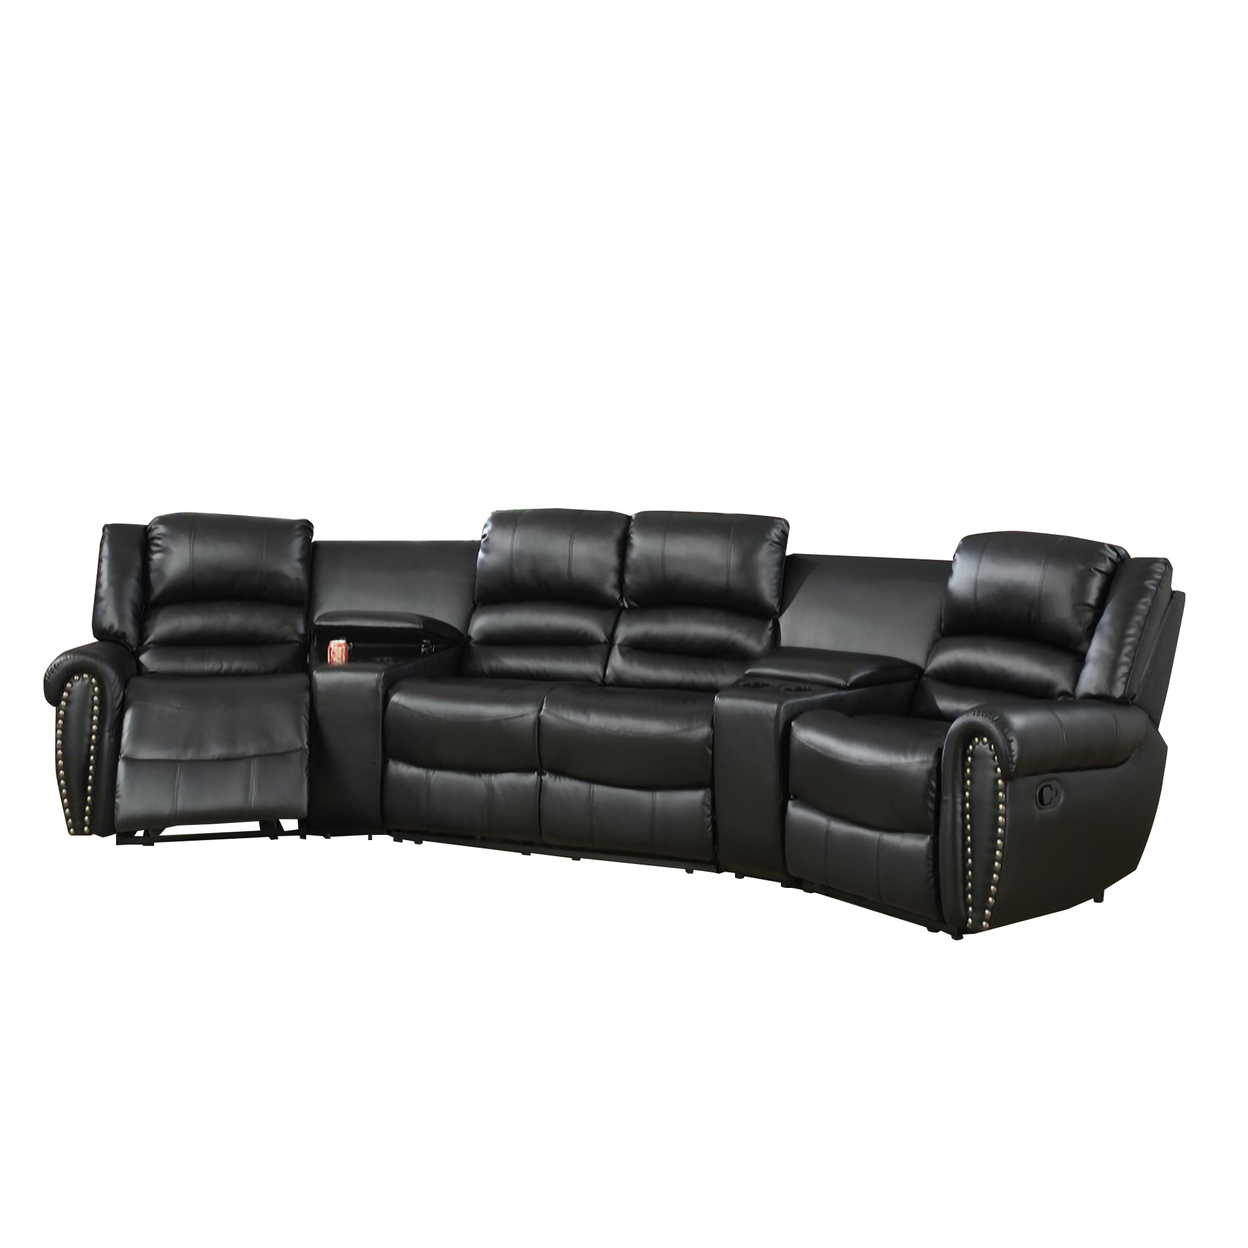 Bonded Leather Motional Home Theater 5 Piece Sectional Black- Saltoro Sherpi